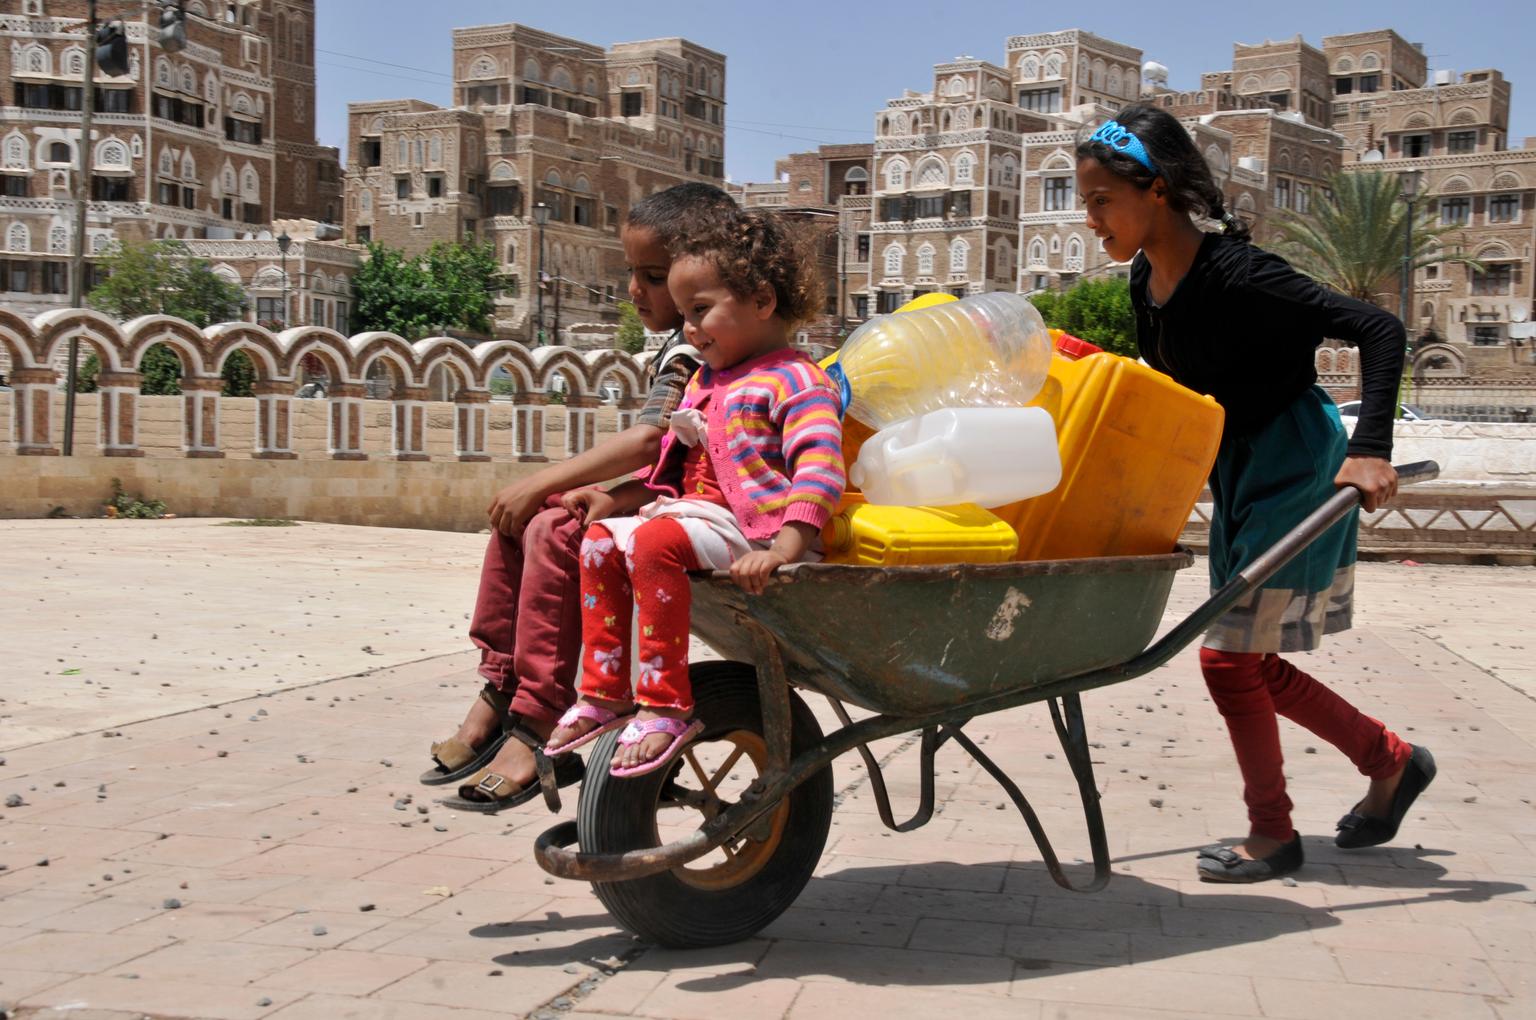 The current conflict has exacted a heavy toll on children in Yemen, destroying water pumps throughout the country. Despite constant shelling, UNICEF has managed to provide clean water to 604,360, including these children in Sanaía.